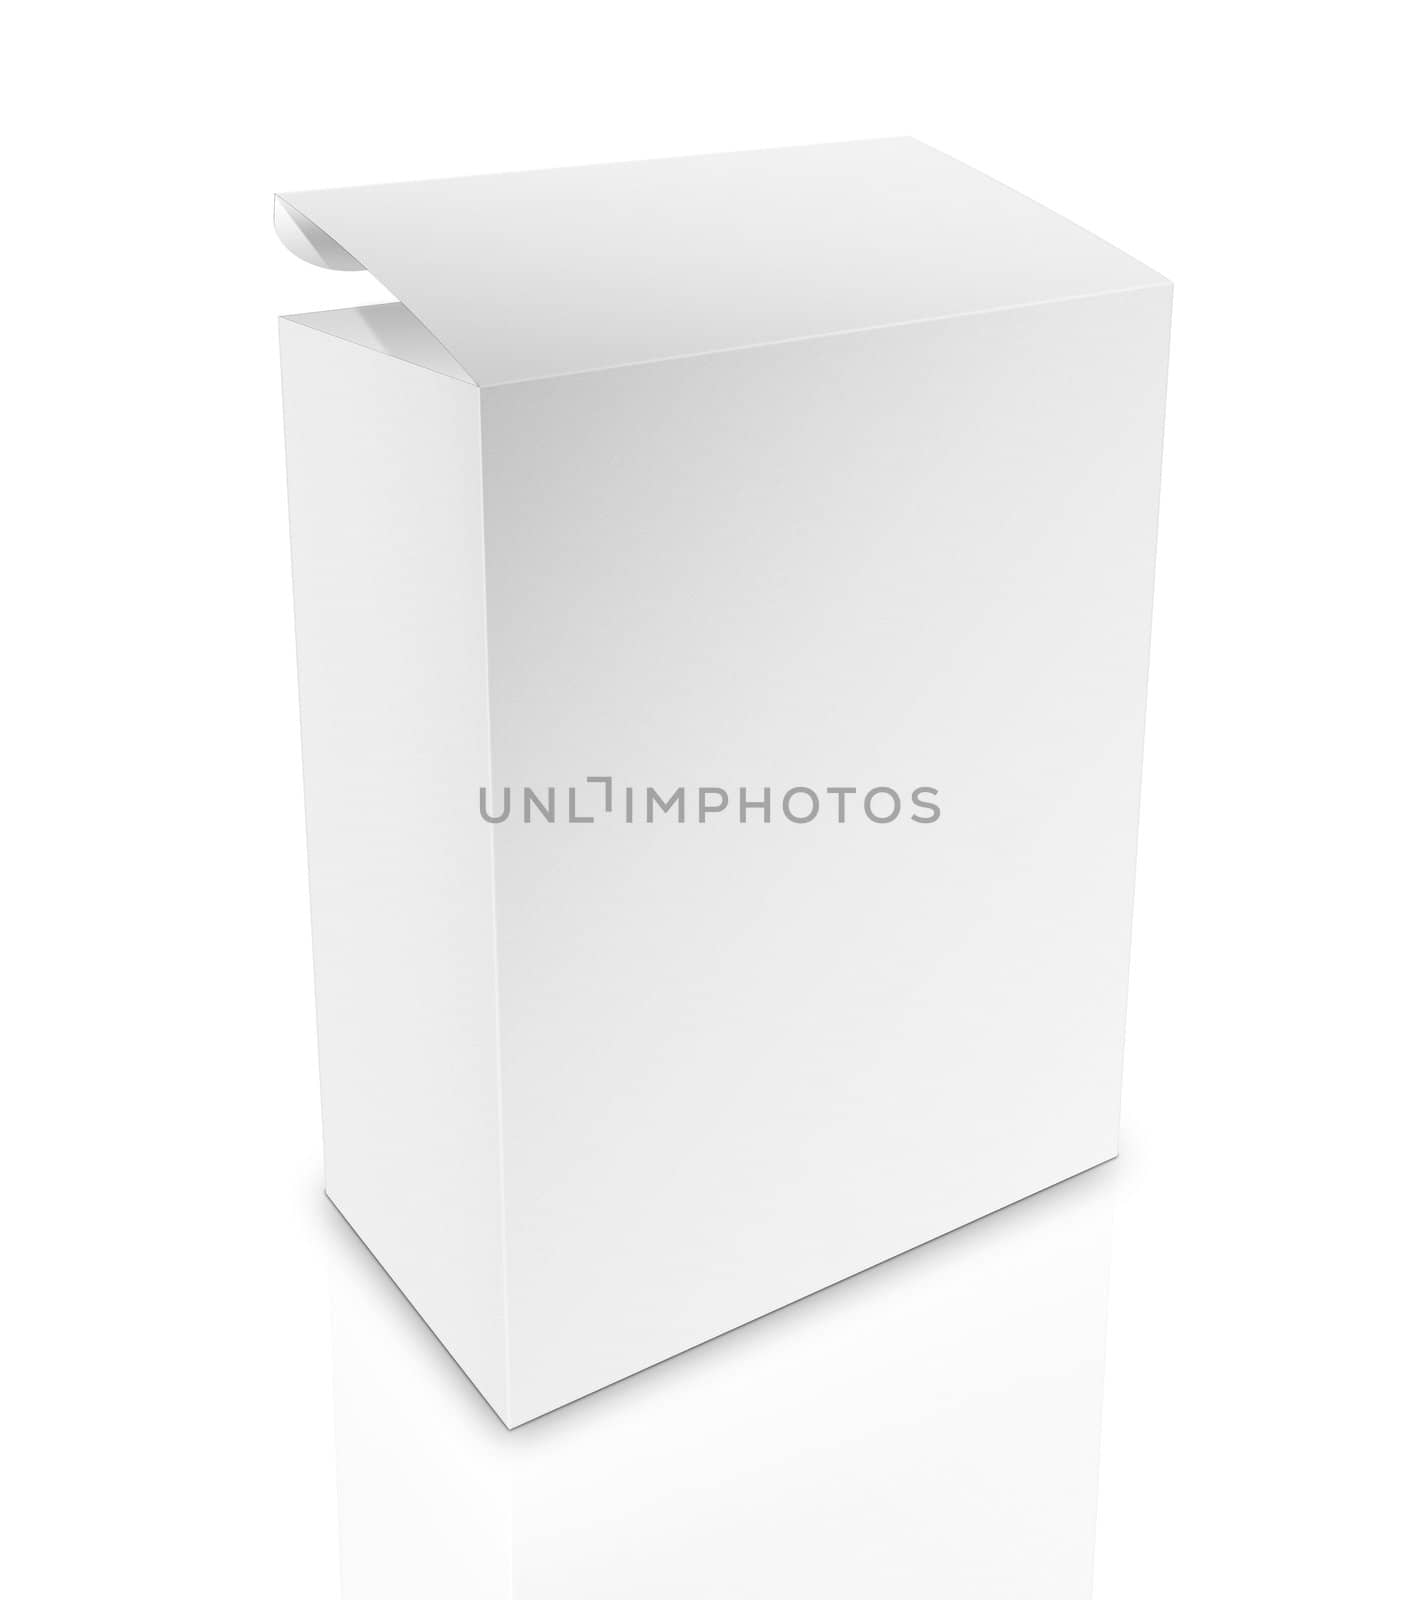 close up of a white box on white background with clipping path